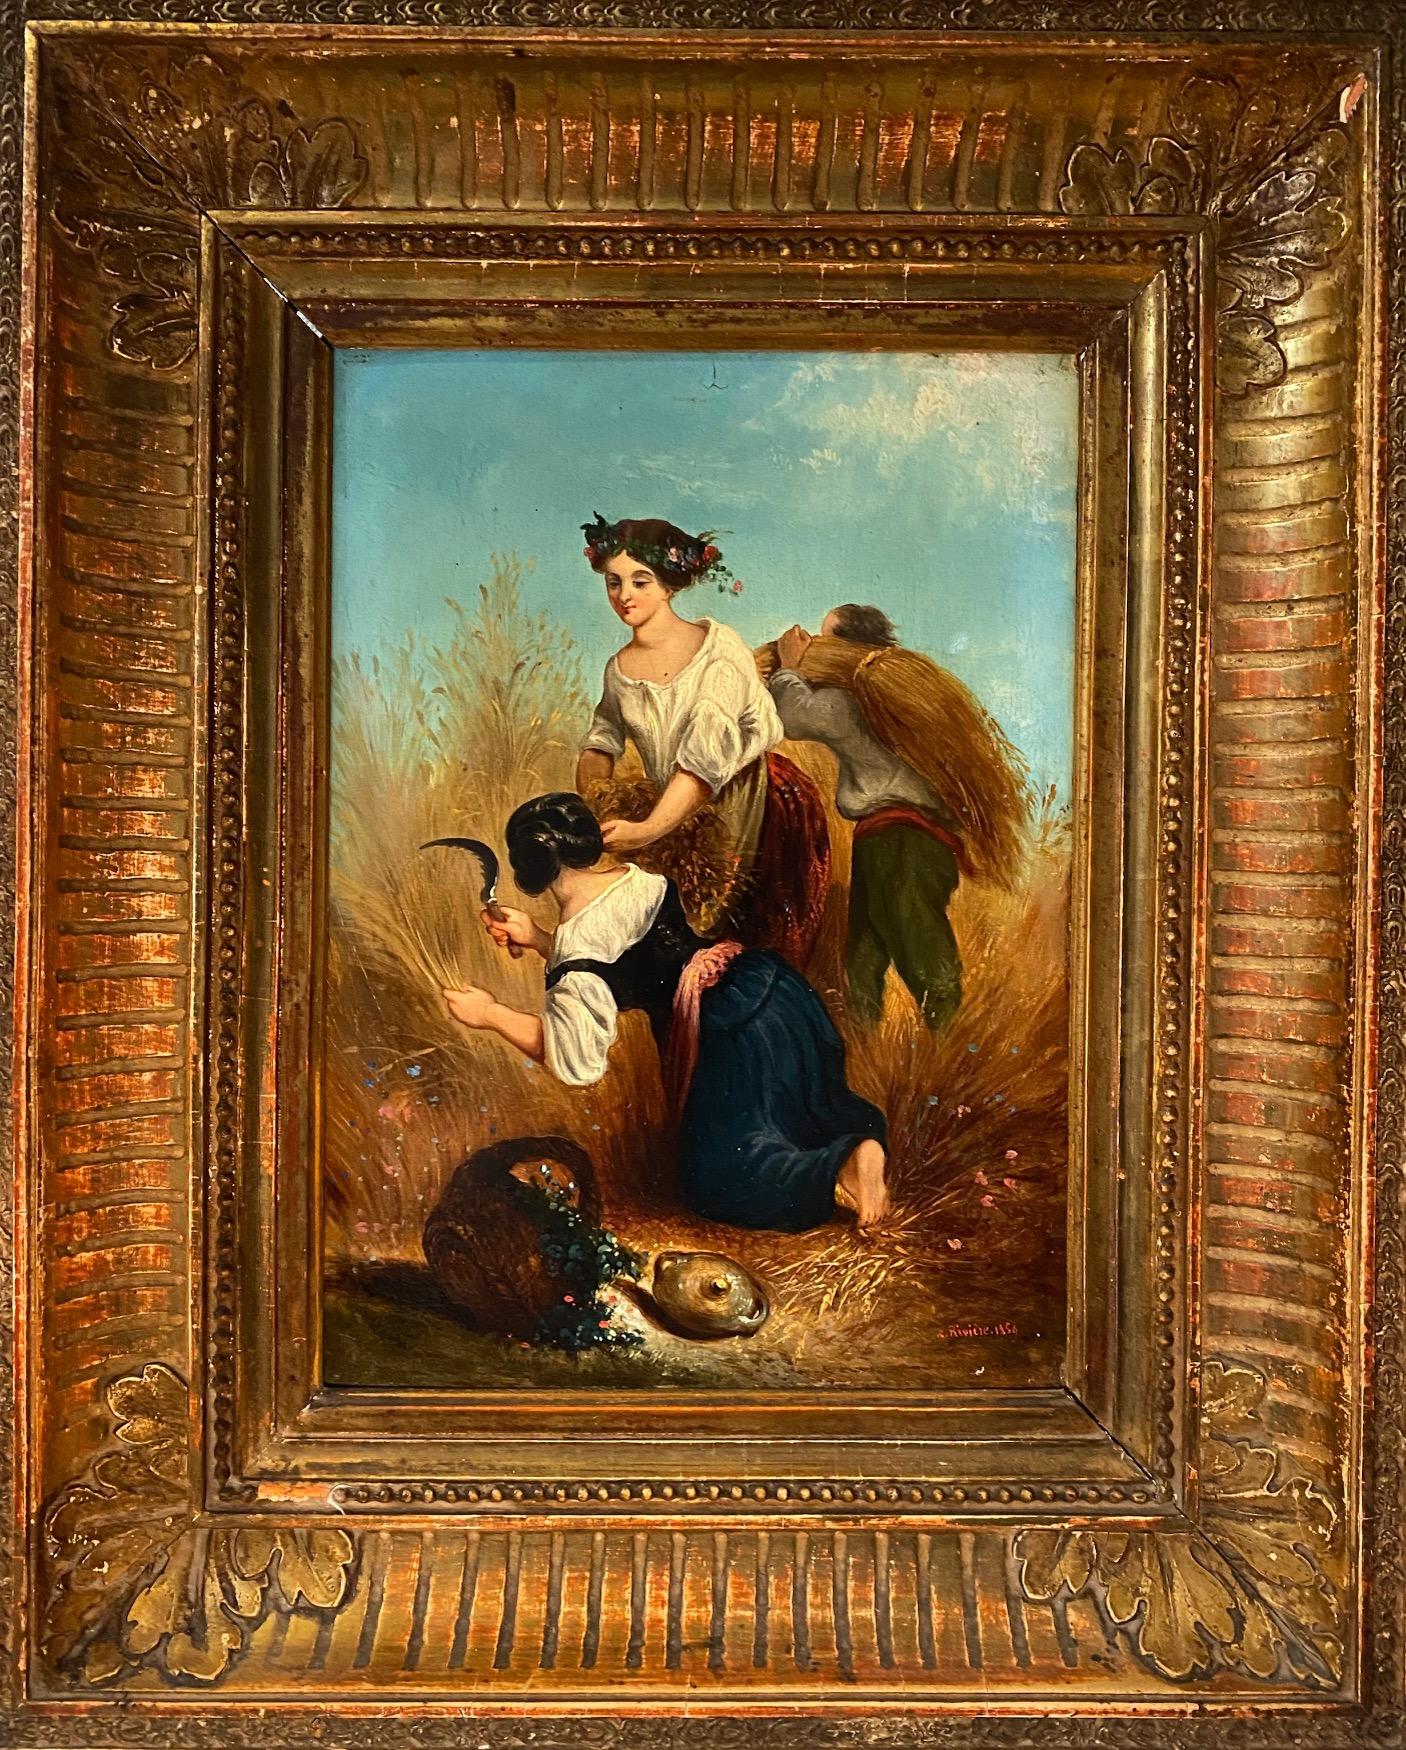 Old work on wood (1859) sold with frame. The total size with frame is 34x41 cm. Signed "C. Rivière" and dated. 